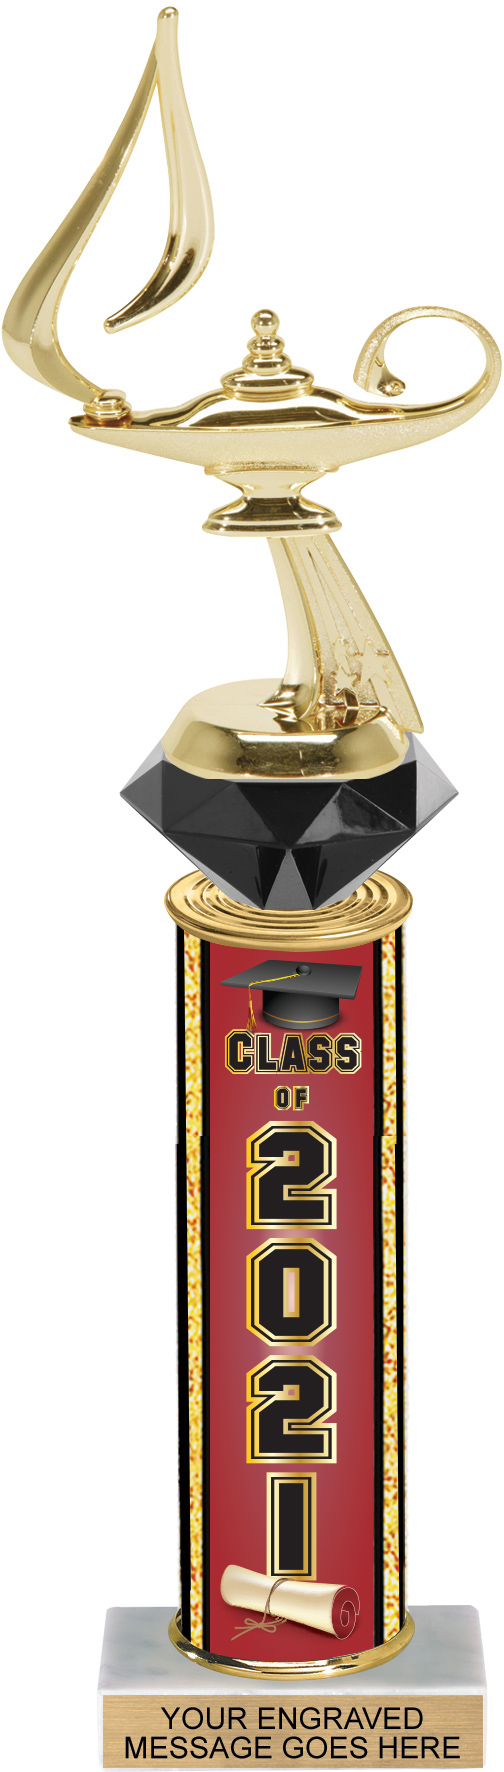 Diamond Riser Exclusive Class of 2021 13 inch Trophy